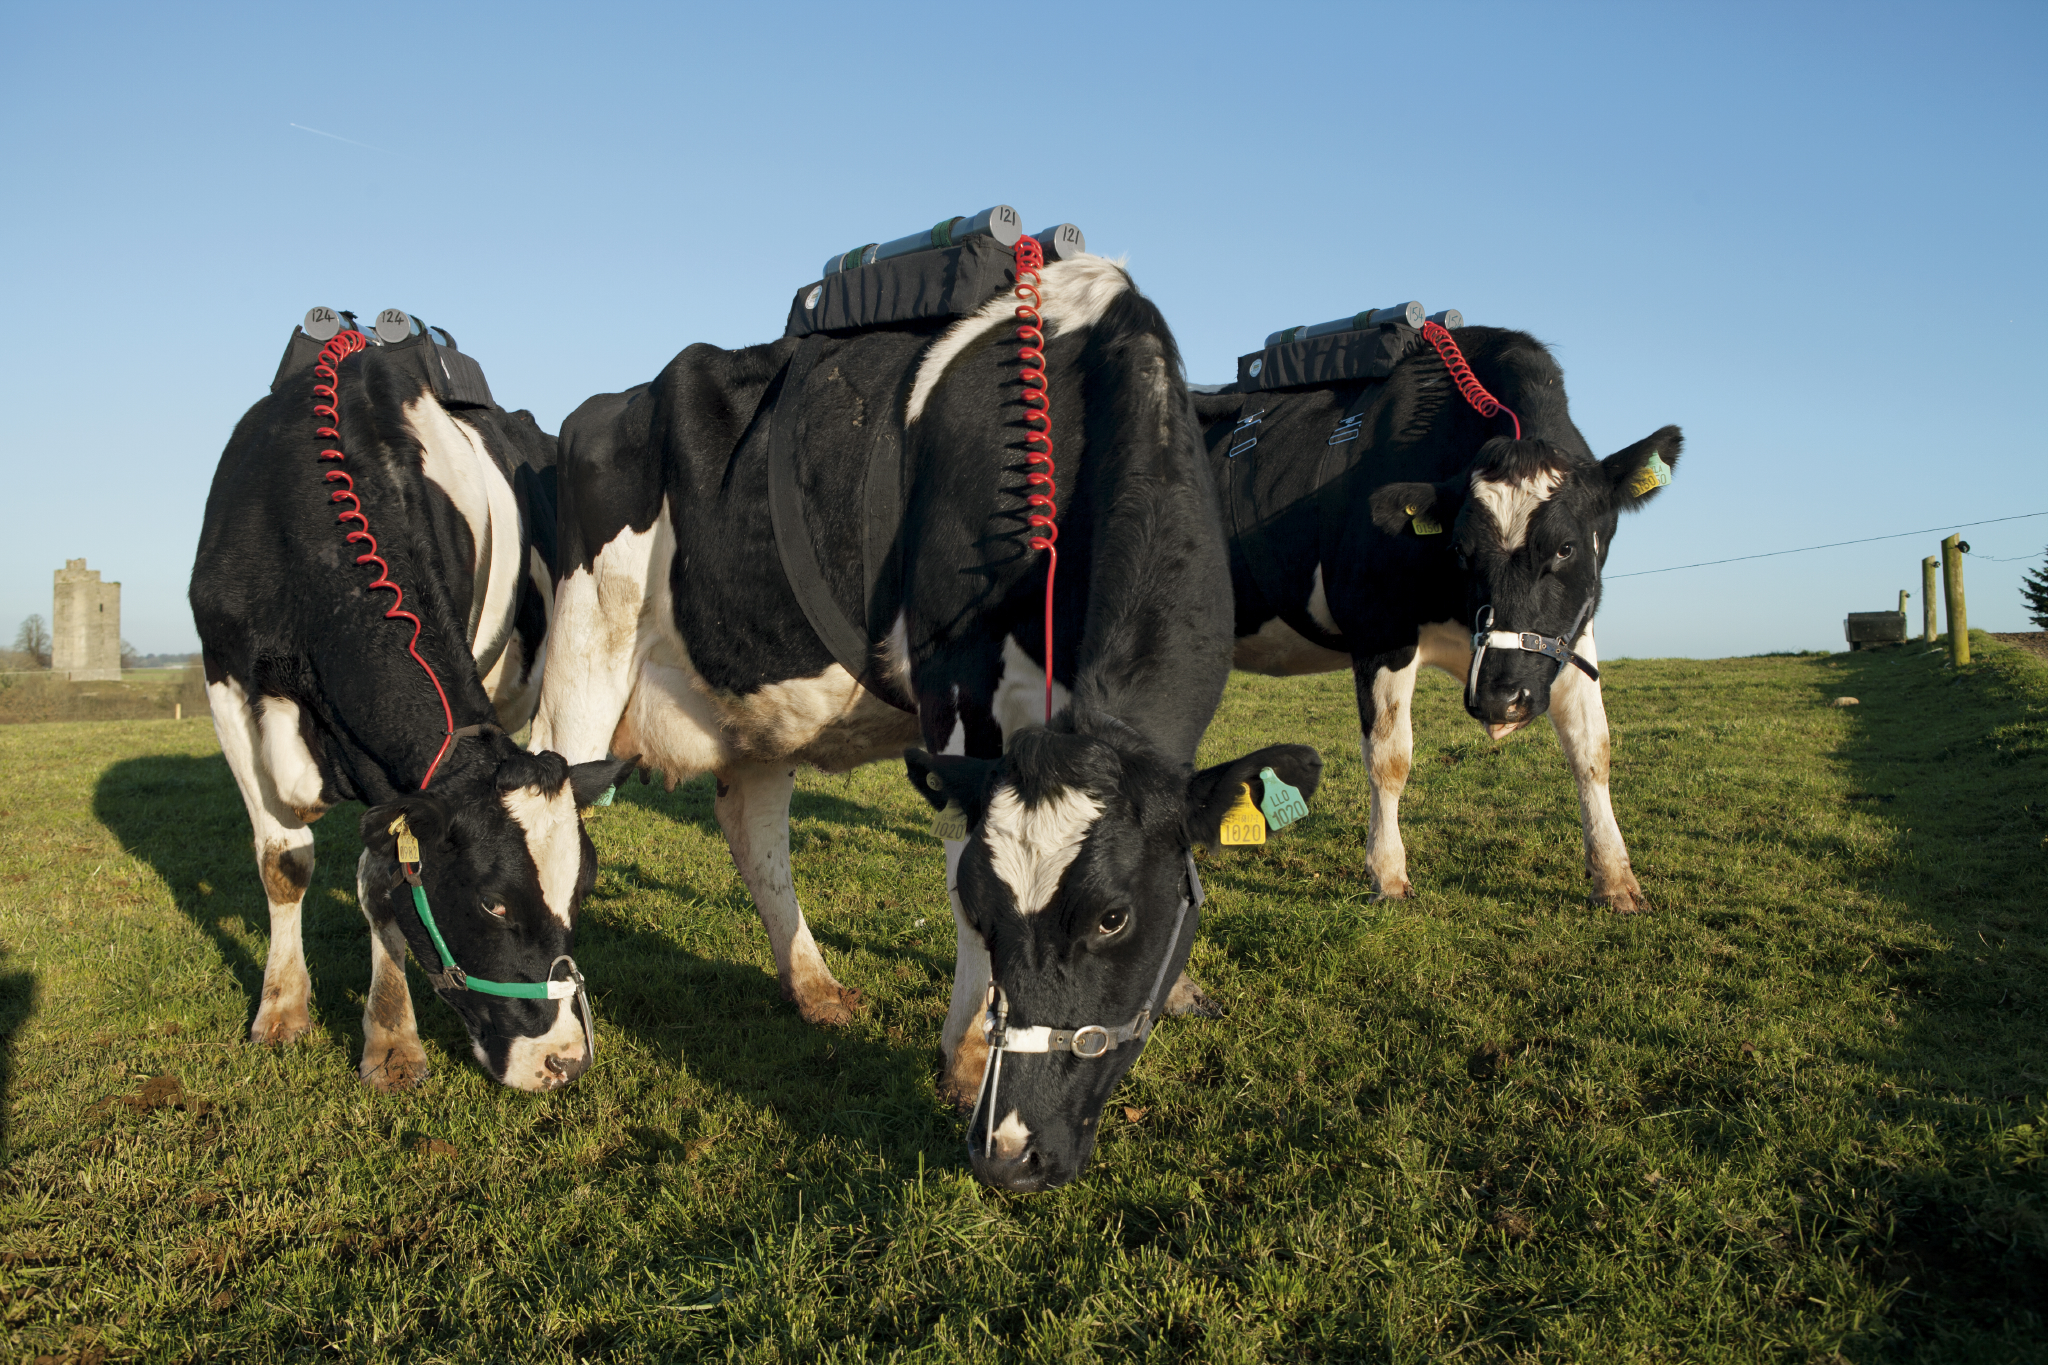 Burp by Burp, Fighting Emissions from Cows